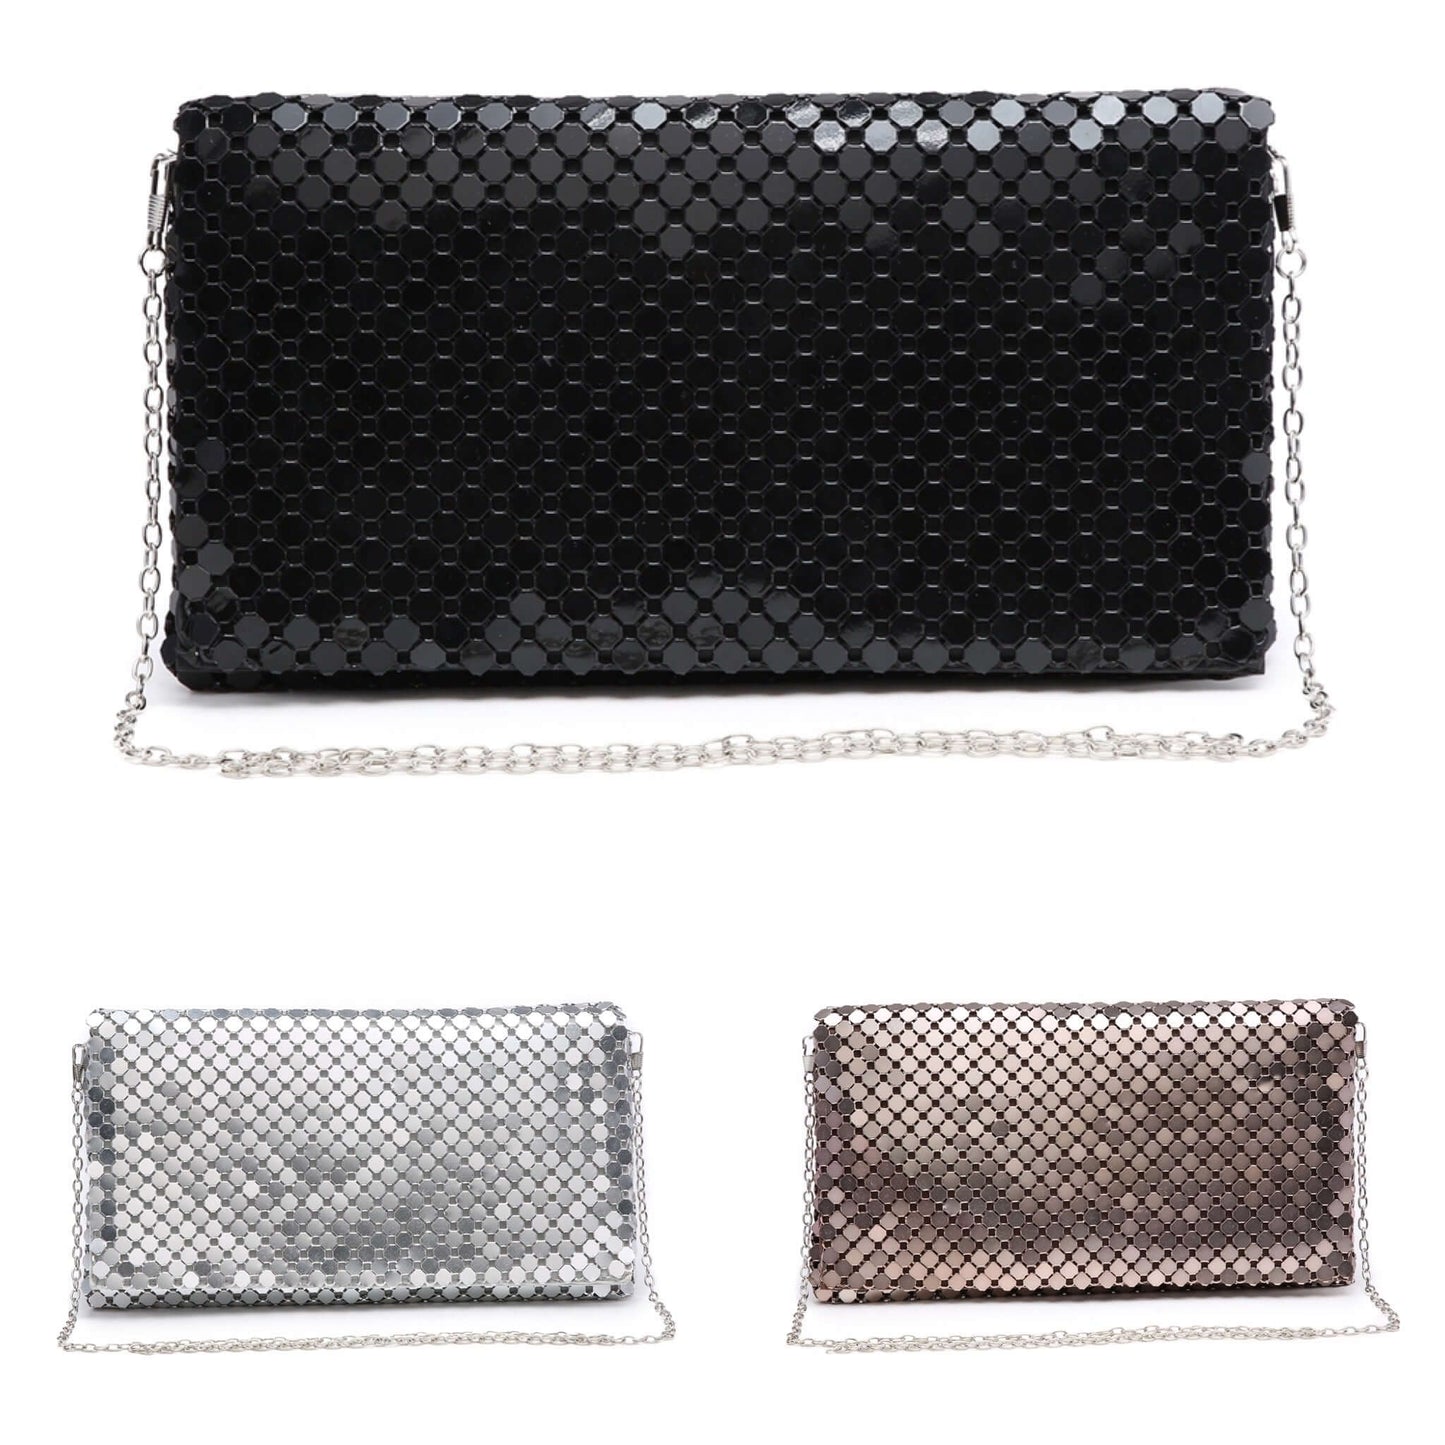 Metallic Clutch Bag with Long Strap